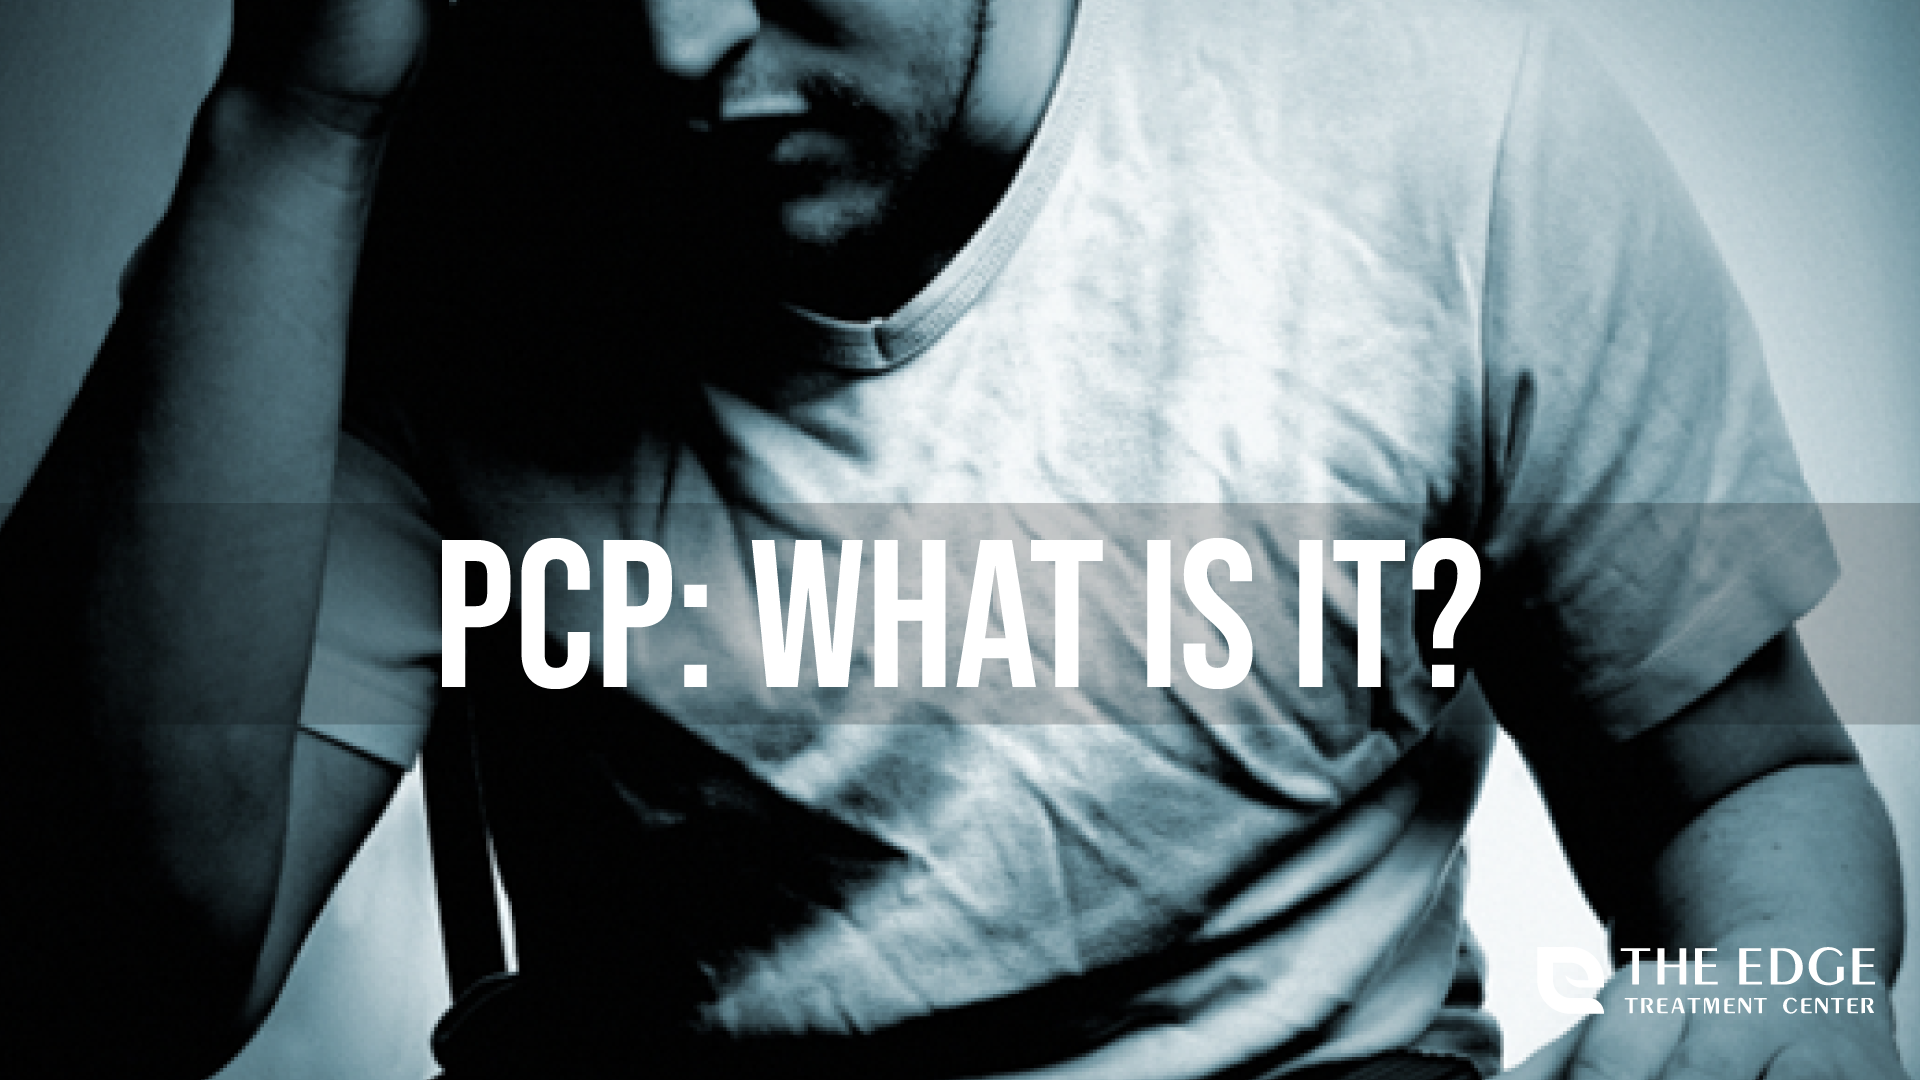 What Are the Long-Term Risks of PCP Use?